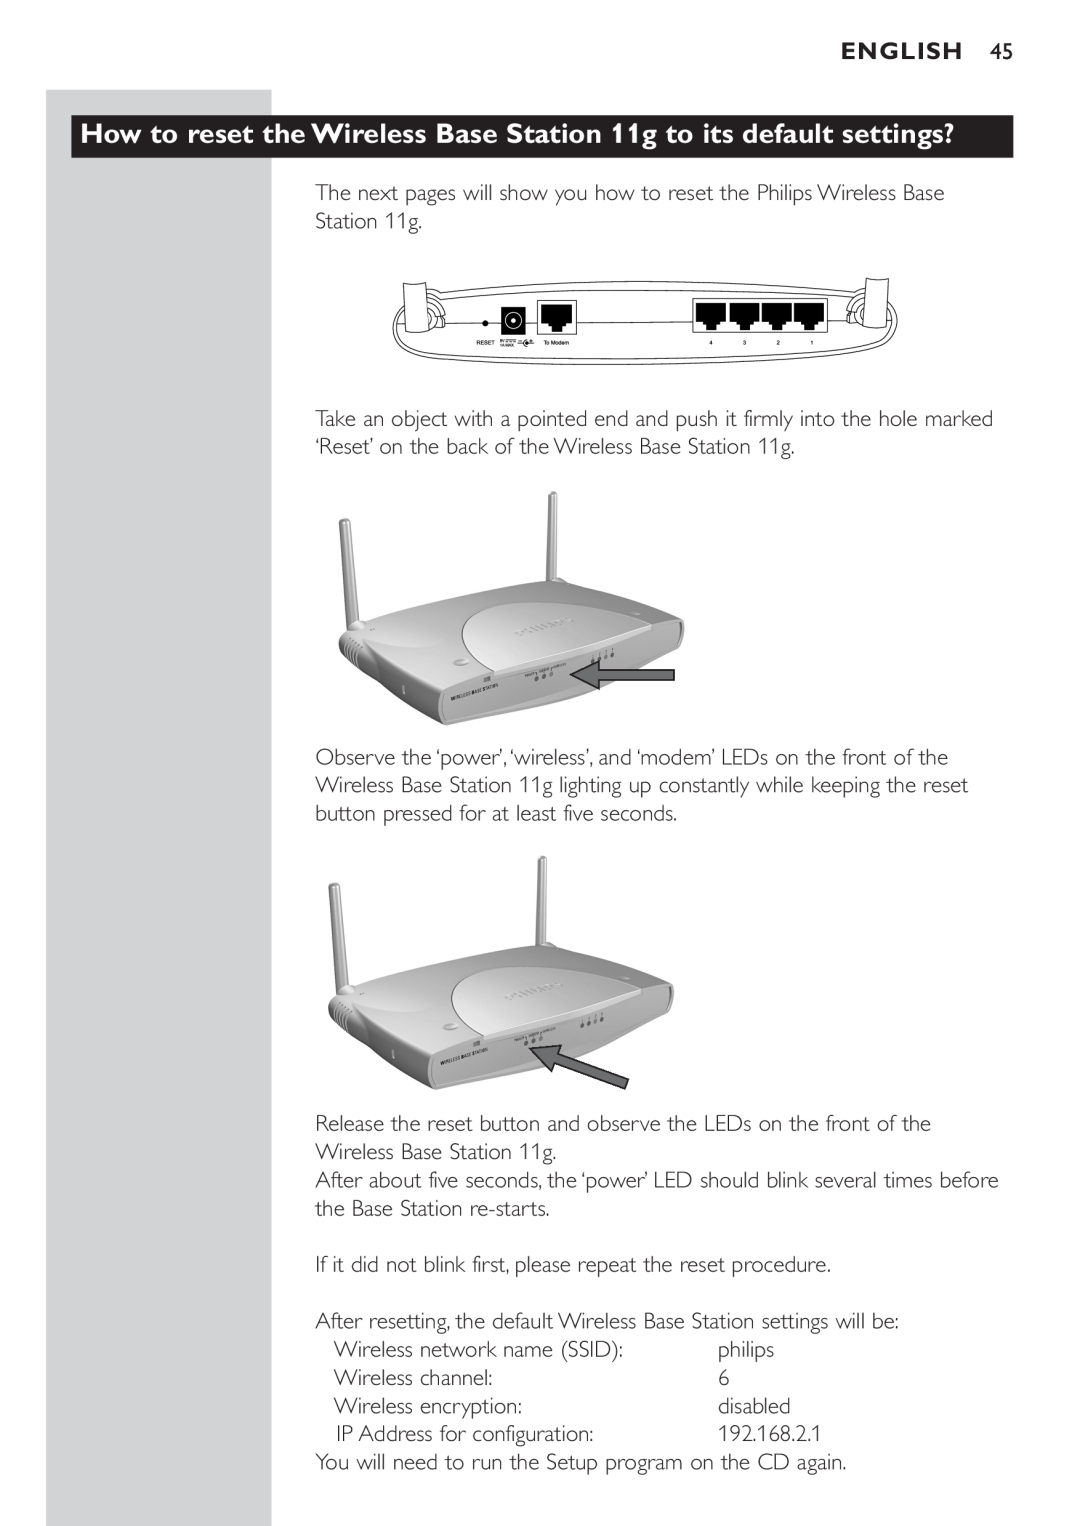 Philips CPWBS054CPWBS054 manual How to reset the Wireless Base Station 11g to its default settings?, English 